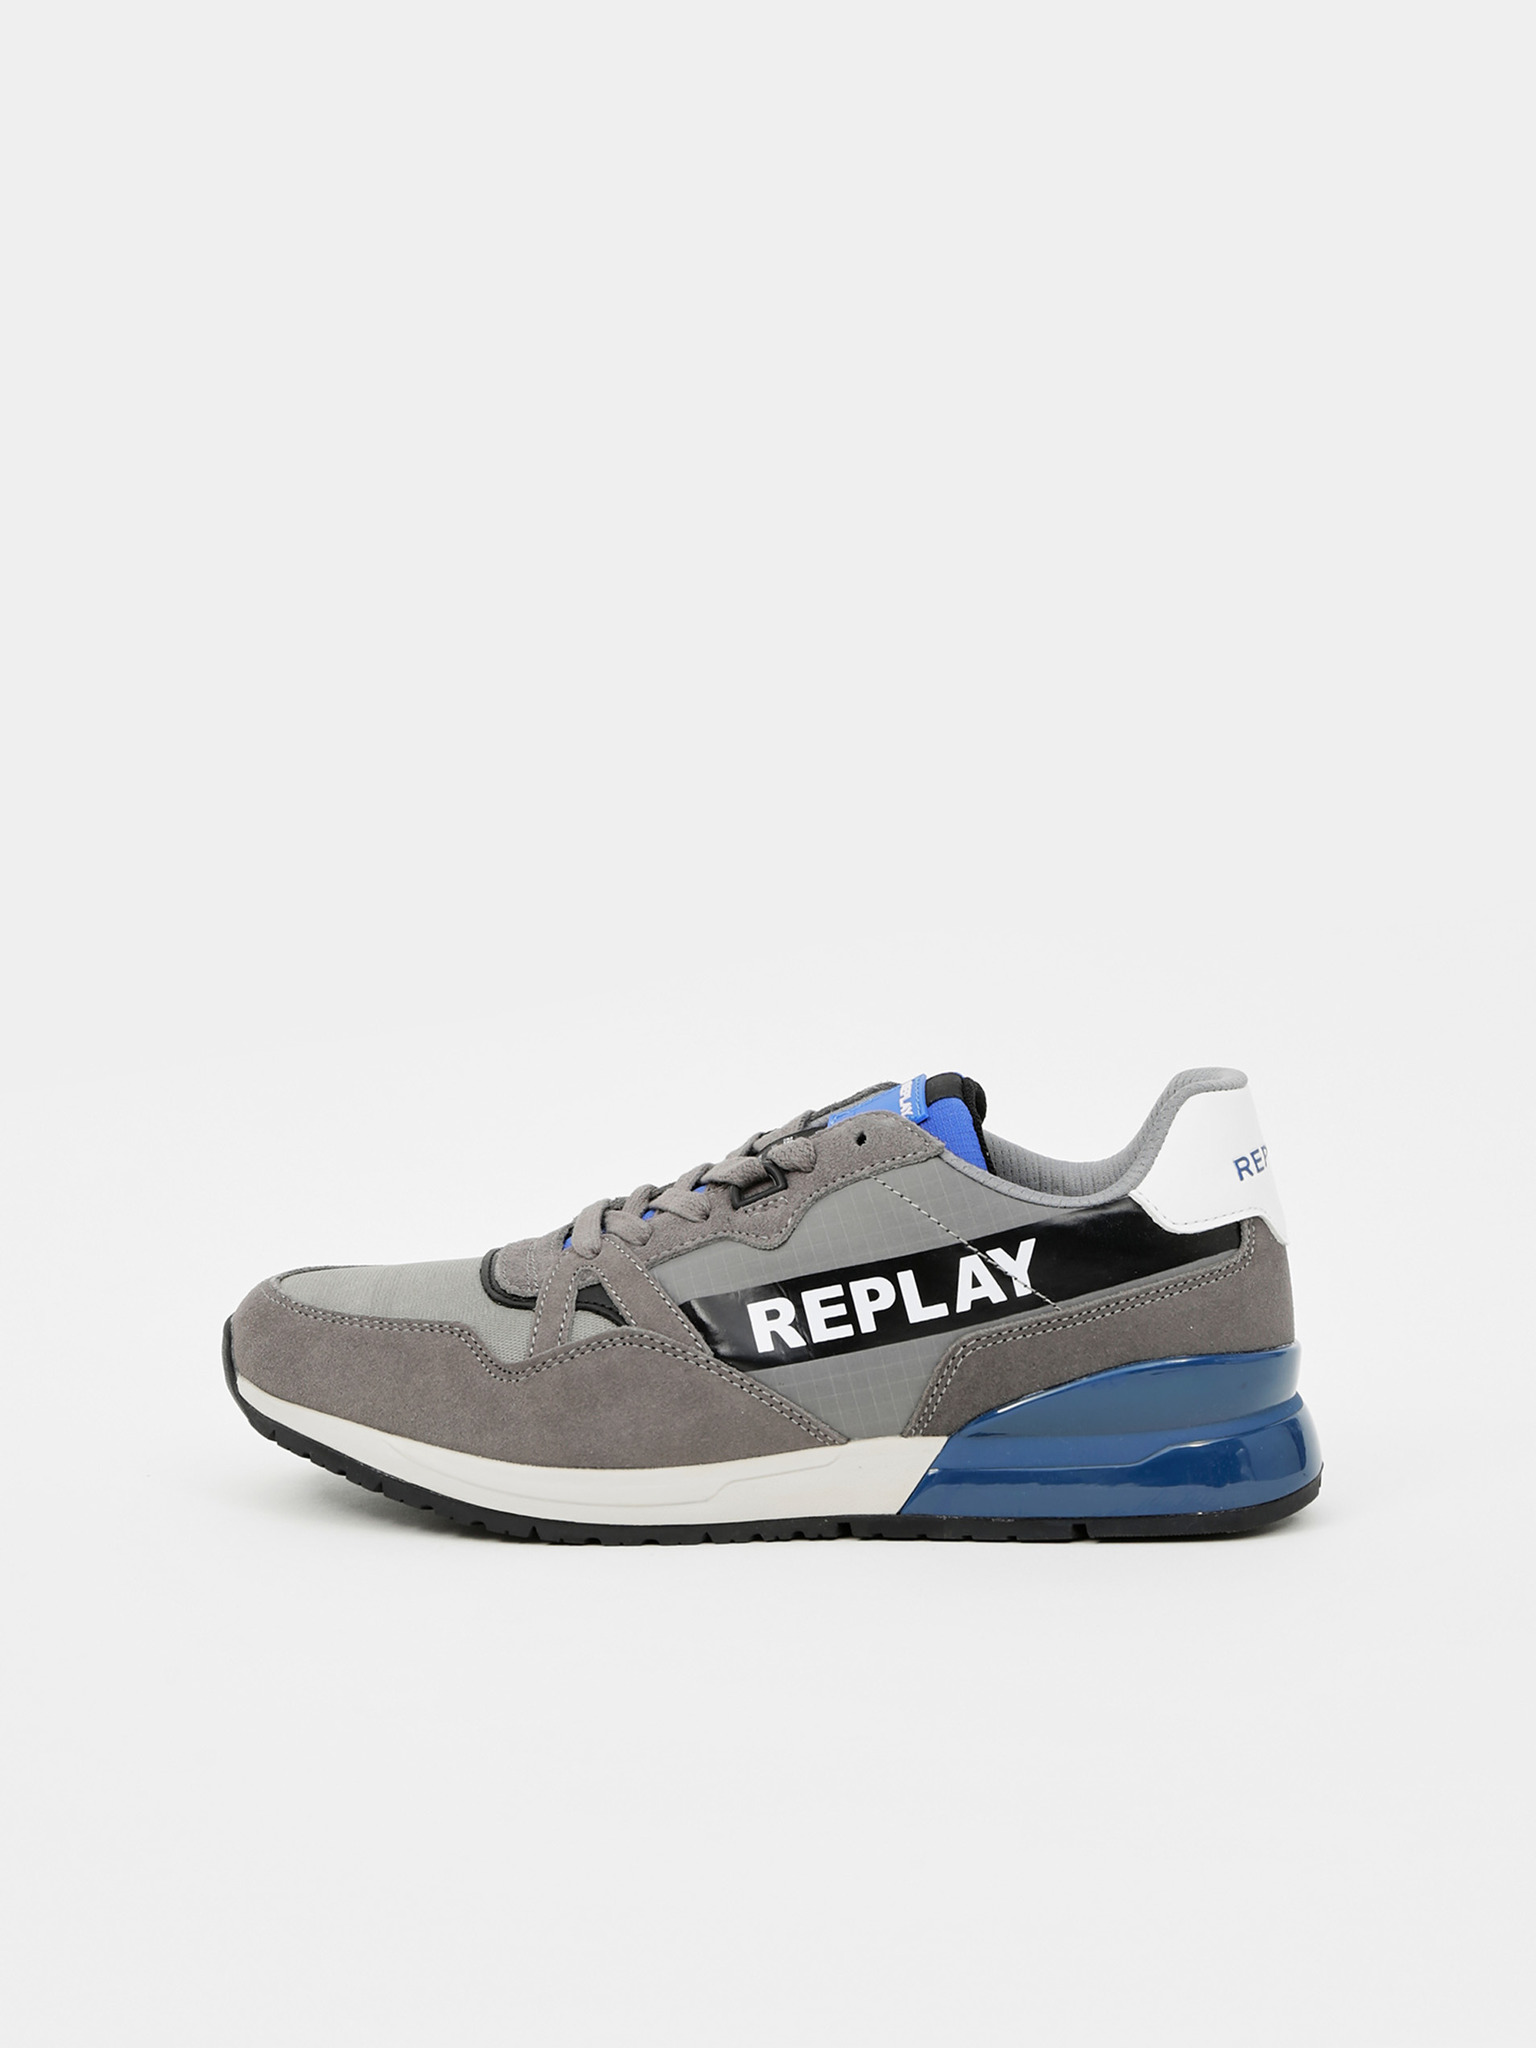 Replay, Shoes, Replay Shoes For Men Size 8 Color White And Blue